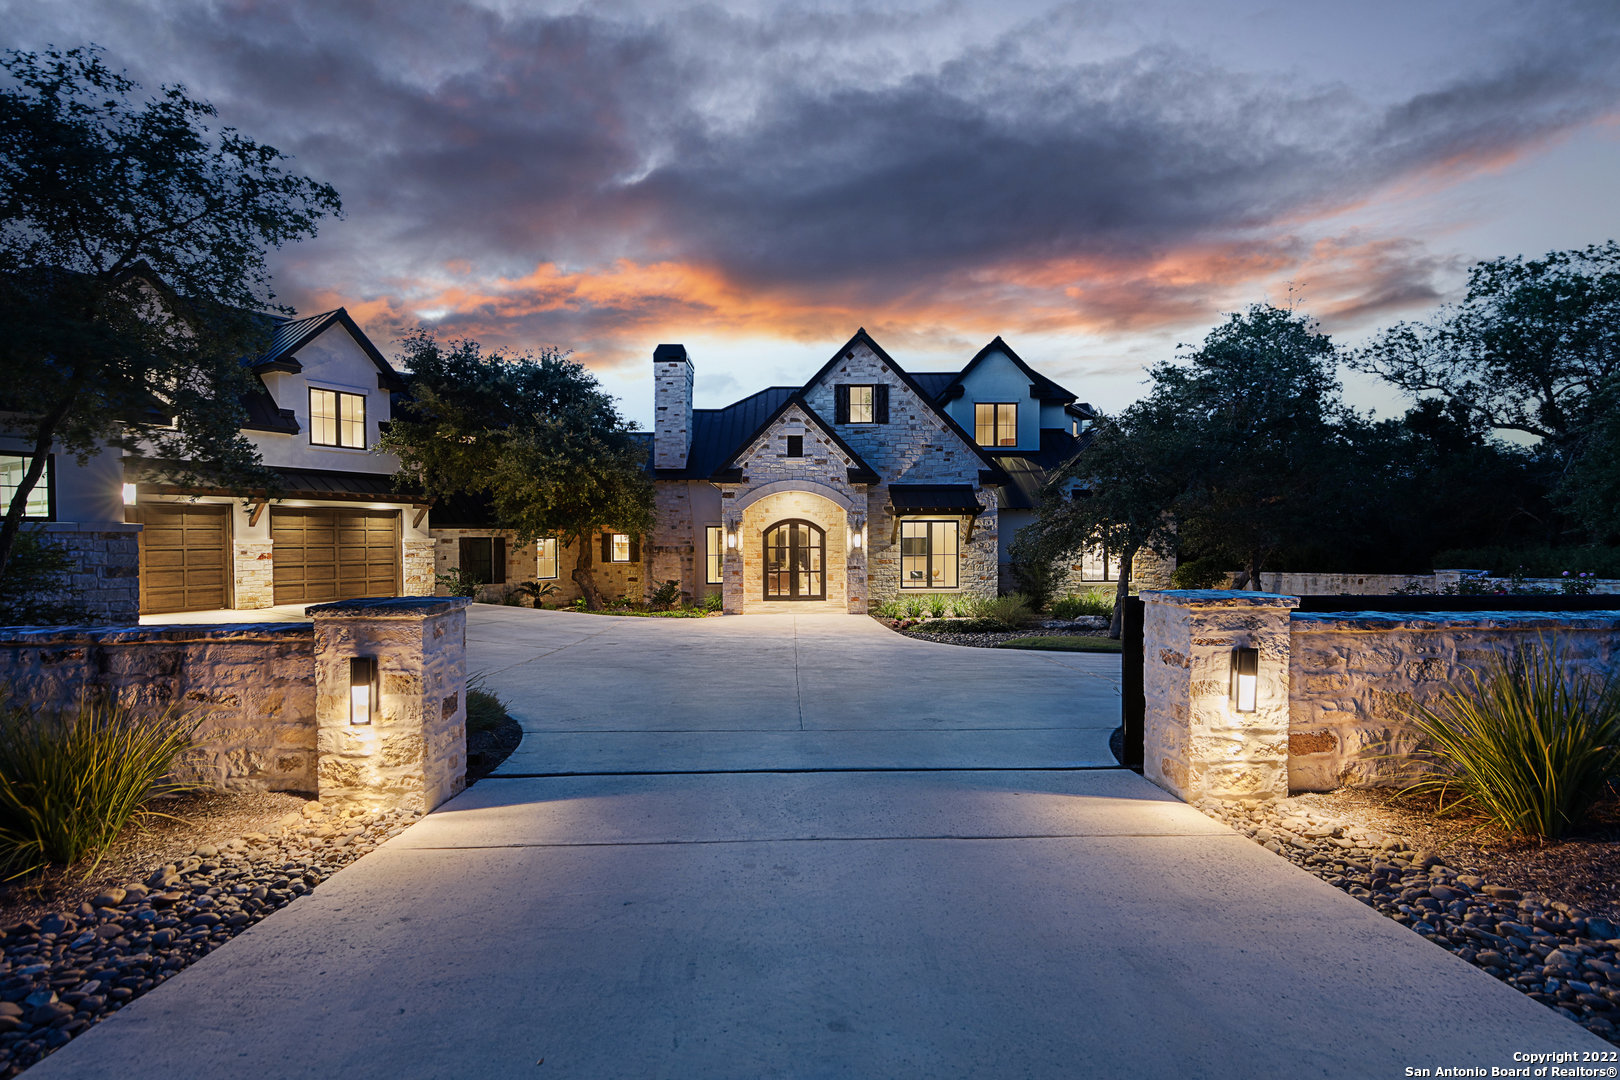 Nestled amidst the serene hill country awaits a grand estate with sprawling acreage and 206 feet of Guadalupe River frontage. Upon arrival, the privacy wall adds beauty and additional security while the custom-made gated entrance opens to unveil a home that embodies hill country living at its finest. Stepping past the double doors reveals an open floor plan complete with glistening hardwood floors, rustic yet refined rock accents and exposed Douglas Fir timber beams. Dinner parties and everyday living are made easy with the chef-inspired kitchen that features commercial-grade Wolf appliances, a custom Limestone vent hood, wine refrigerator, plenty of counter space for prepping and an easily accessible dining nook. After supper, retire to the cozy family room with a rock fireplace surrounded by a custom limestone hearth and mantle. When hosting friends and family, the backyard is an oasis for relaxation and year-round entertainment. Unwind in the elaborate heated swimming pool with spa, swim up bar and a 7.5-ft tall waterfall, craft a few s'mores around the fire pit, or recline on one of the many outdoor patios including an observation deck that overlooks the Guadalupe riverbank with outdoor living and cooking area below. This residence is the only Guadalupe riverfront available in Cordillera Ranch!